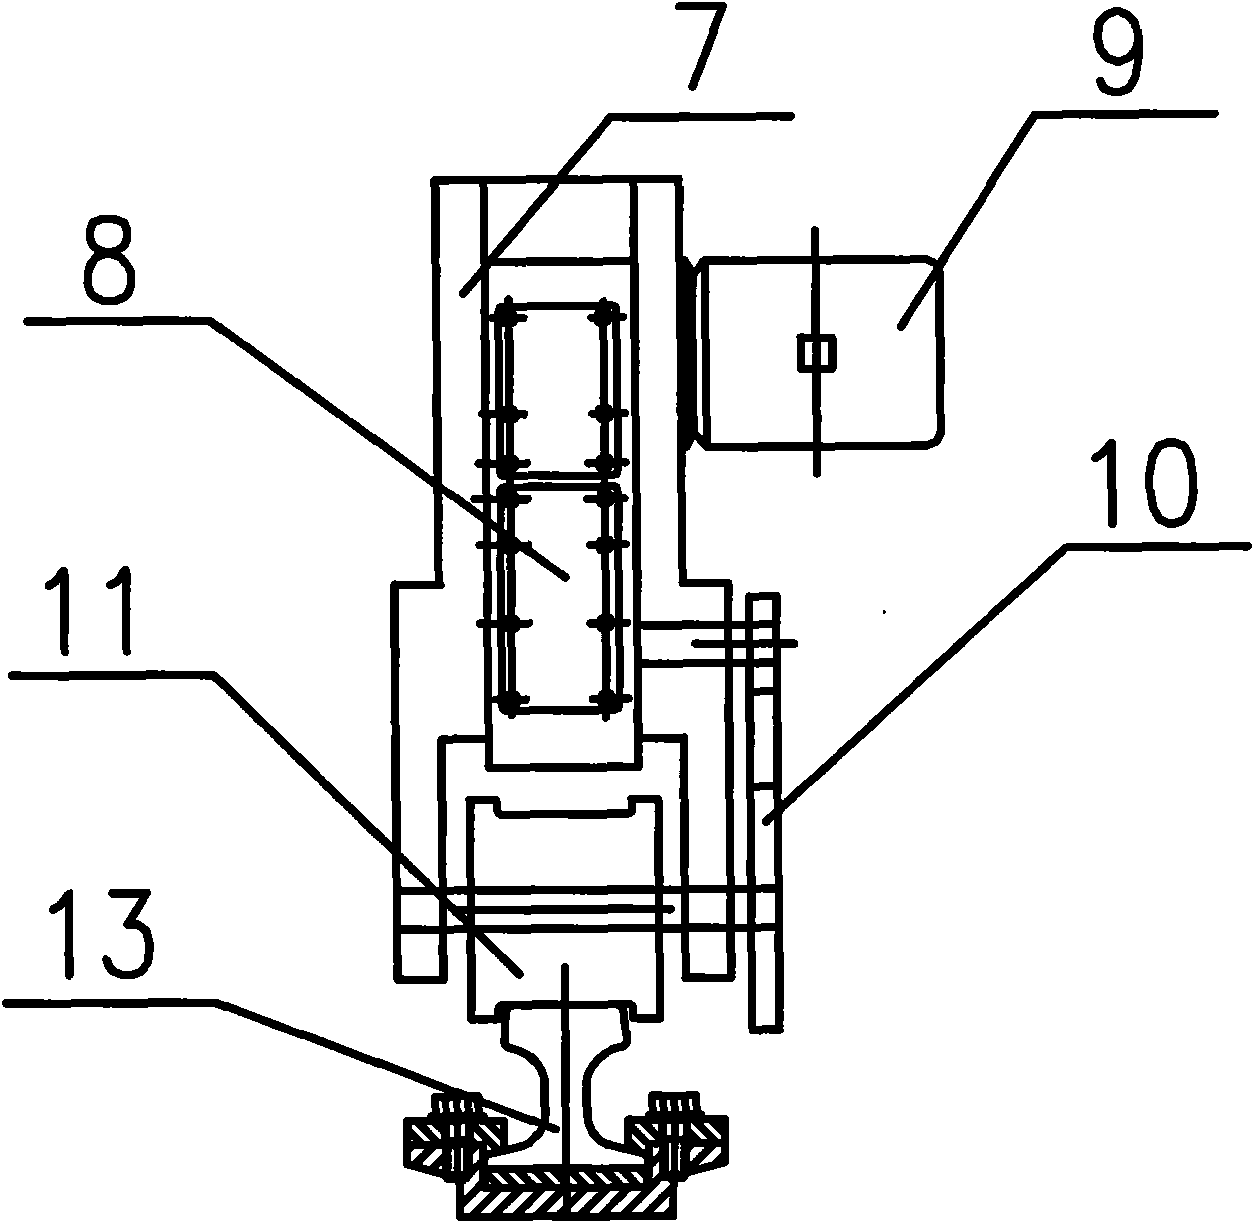 Rotary combined machine tool for processing oversized pitch plane